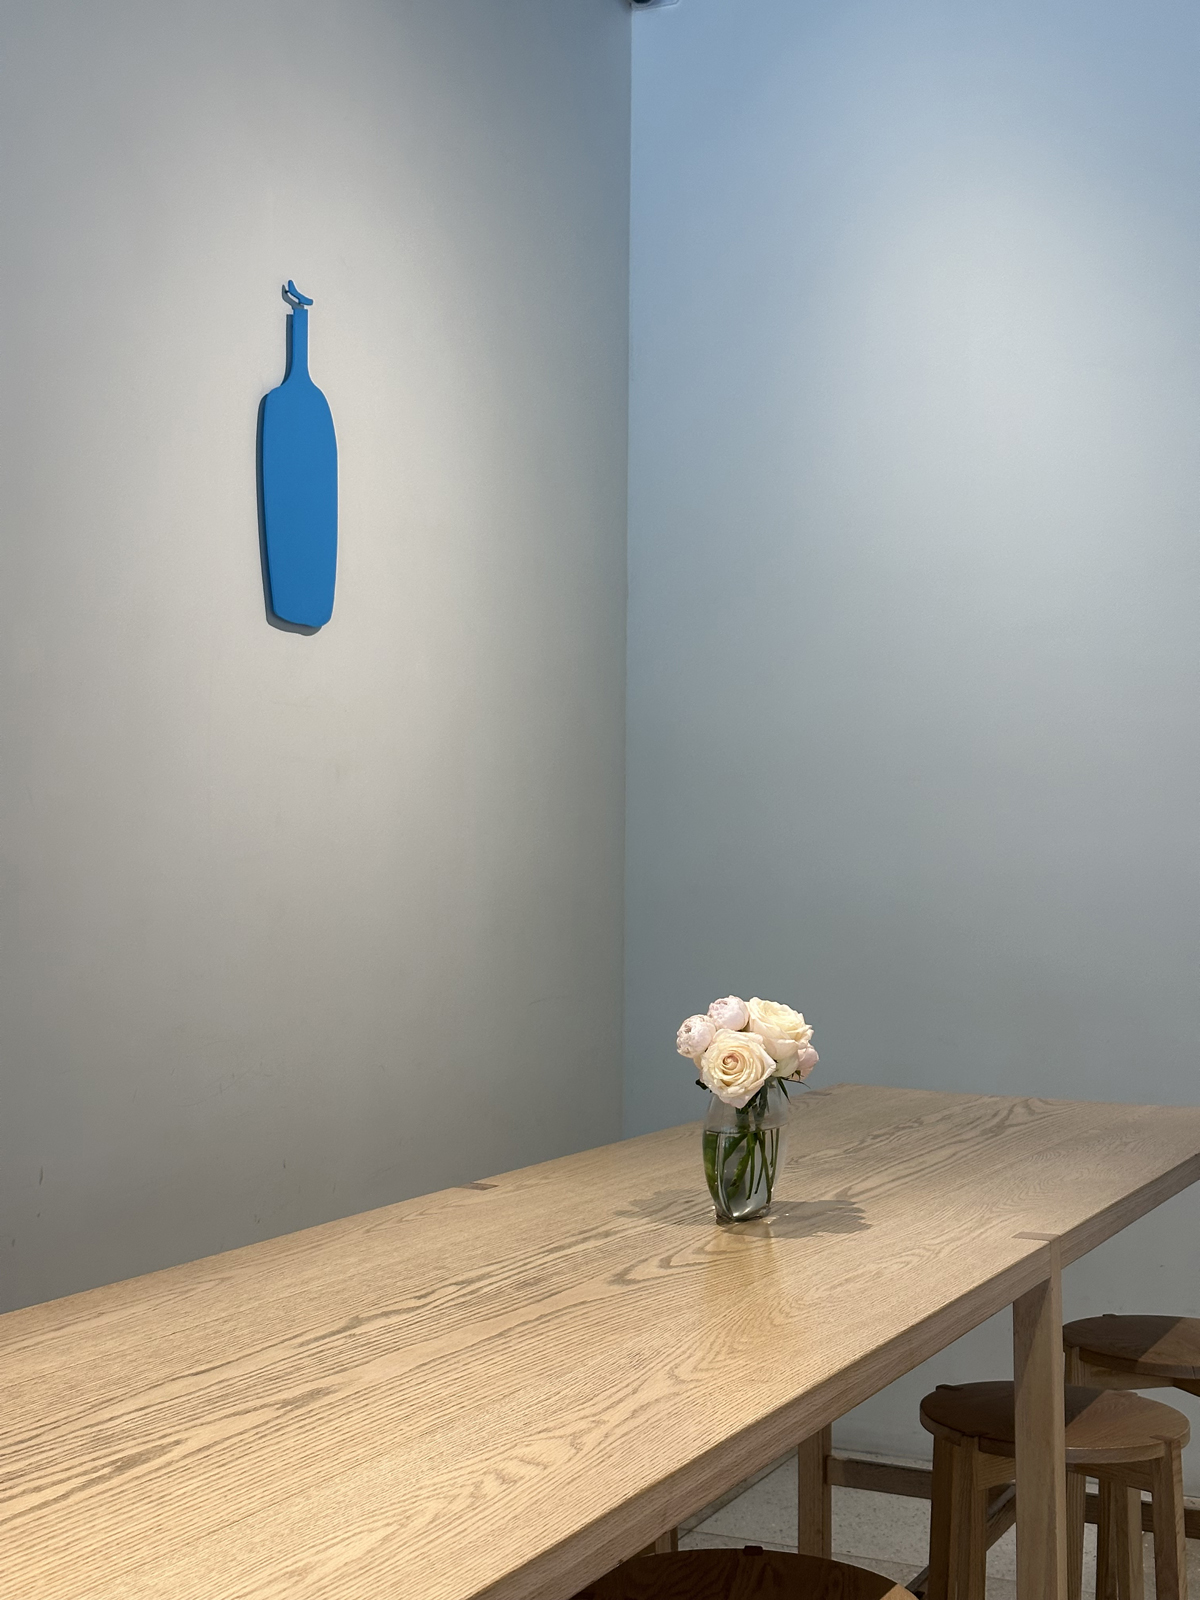 We visited this Blue Bottle almost every day for our morning coffee.